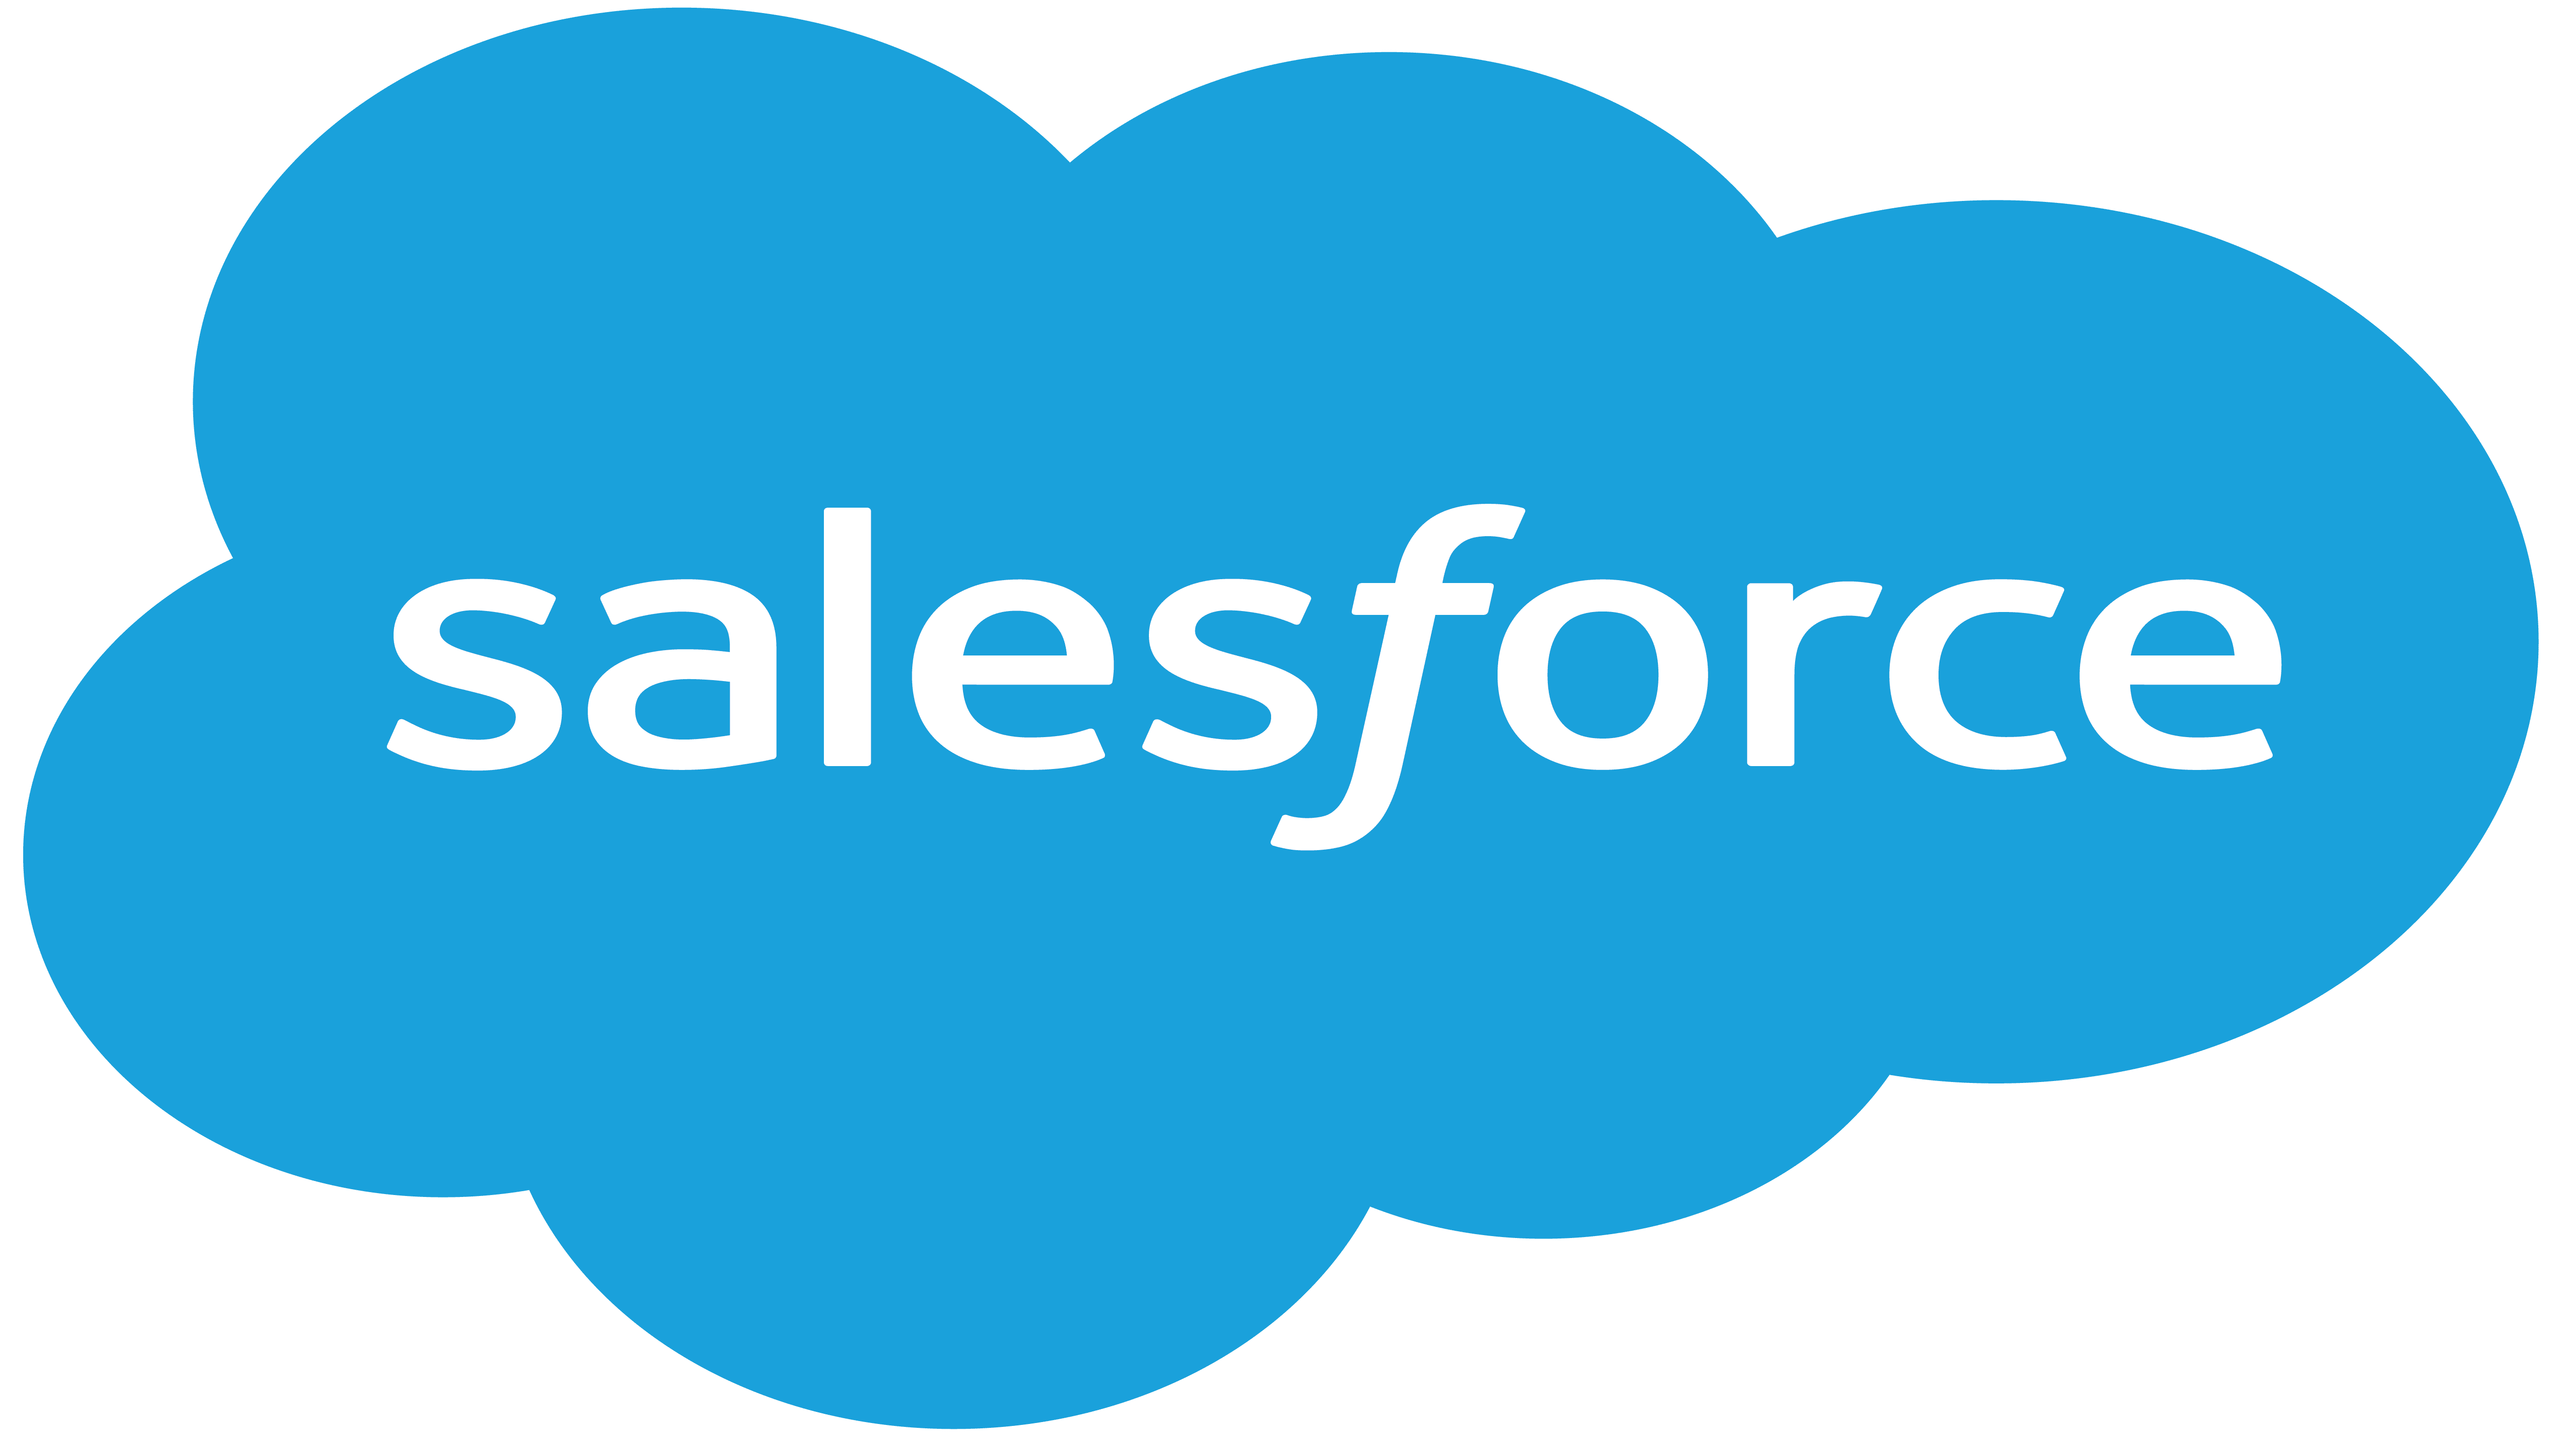 SalesForce - ethical companies to invest in